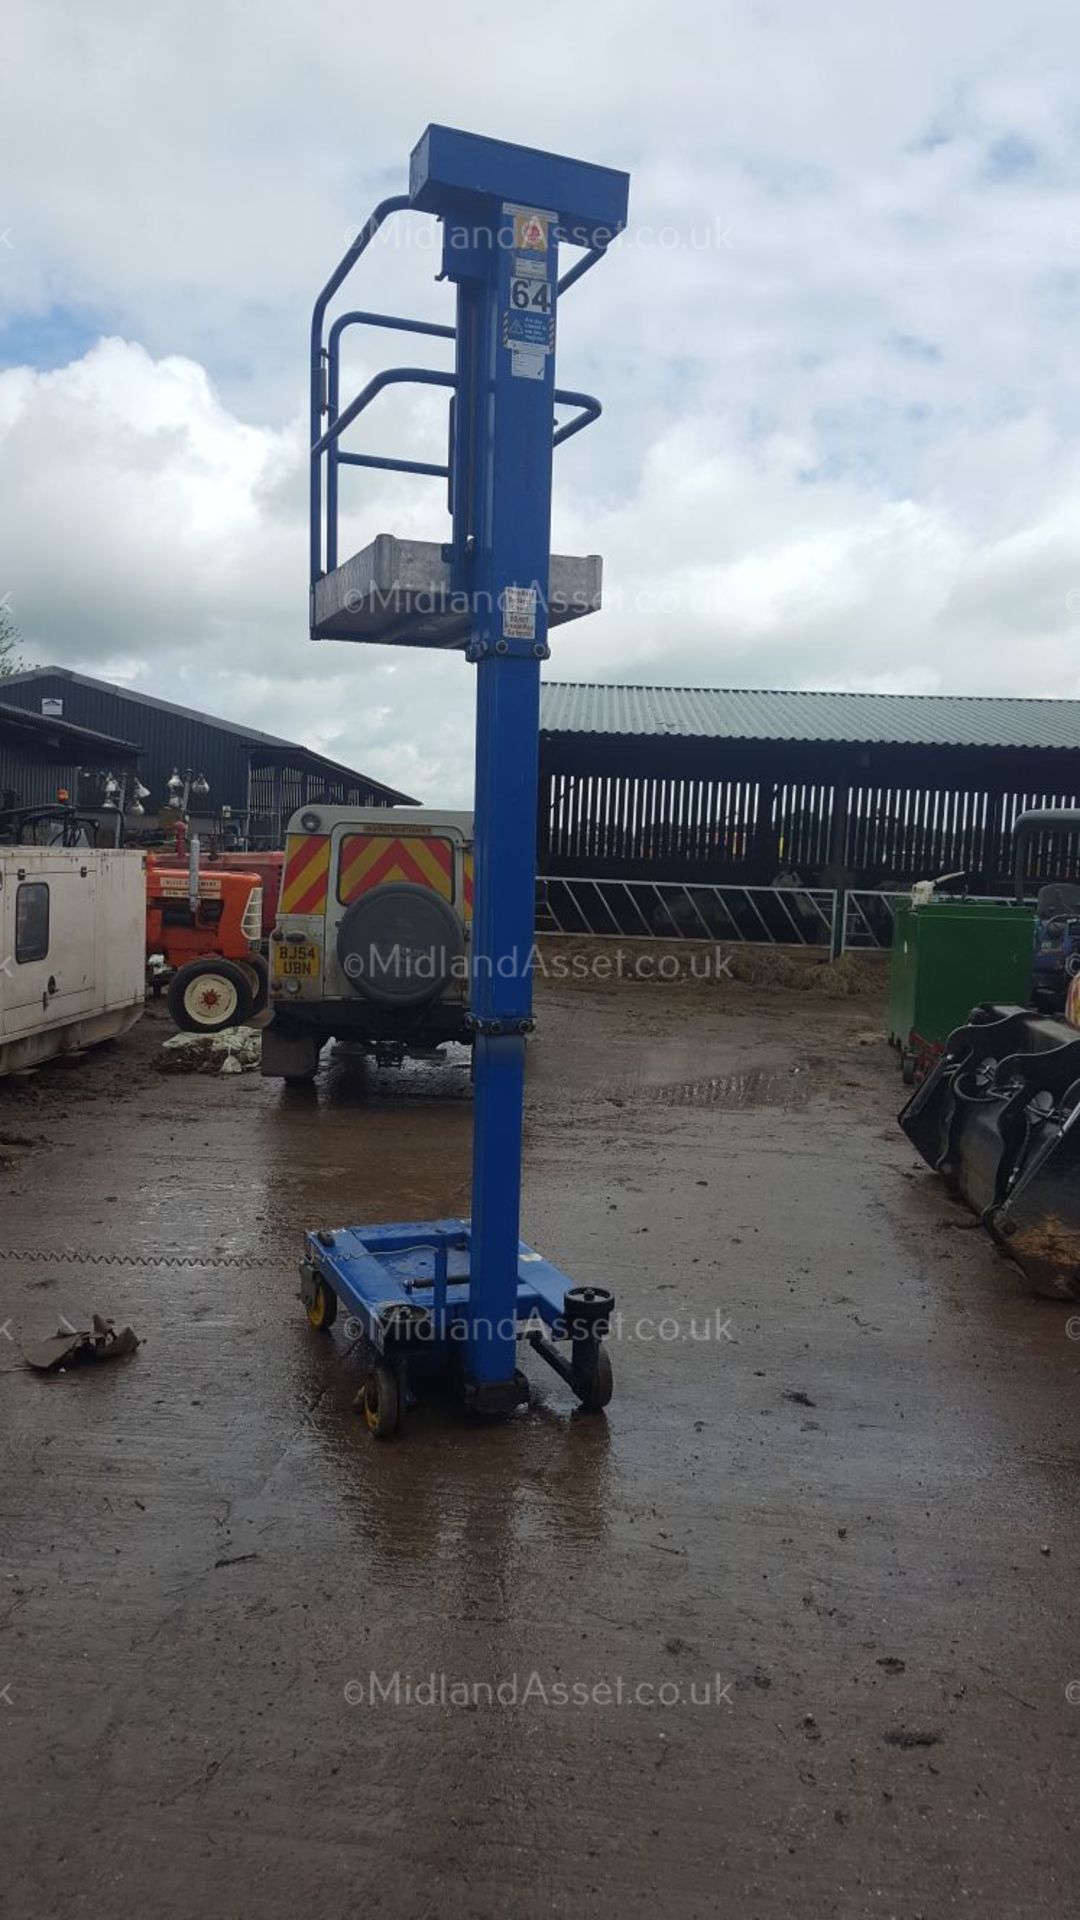 2010 POWER TOWER NANO ELECTRIC LIFT. ALL SELF CONTAINED CHARGING UNITS, CHOICE OF 14 *PLUS VAT* - Image 6 of 6